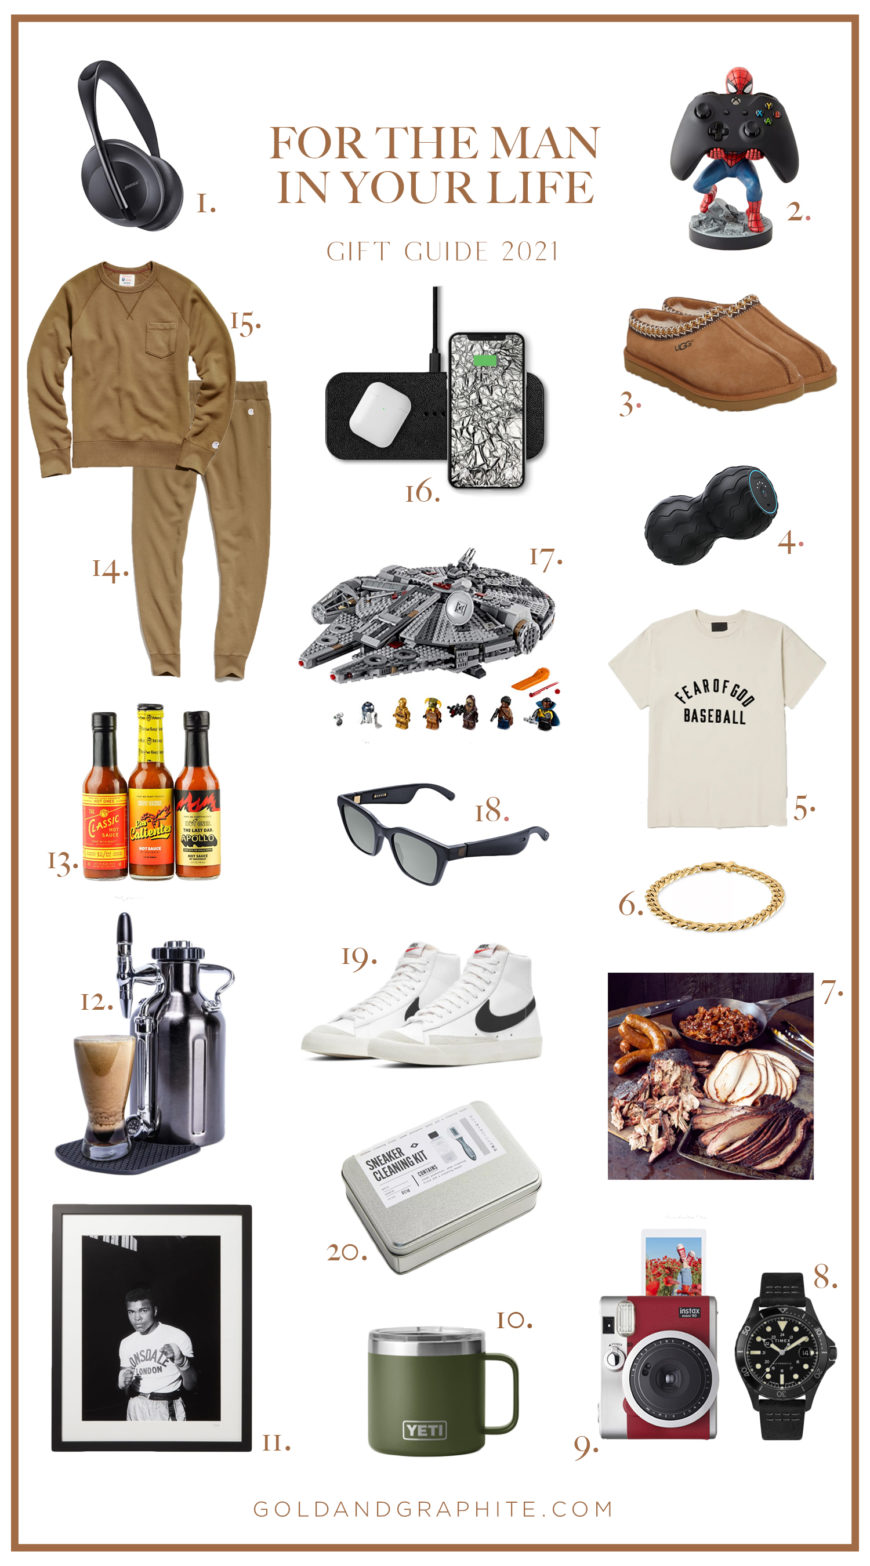 His & Her Gift Guide: Gifts That Work For Men And Women